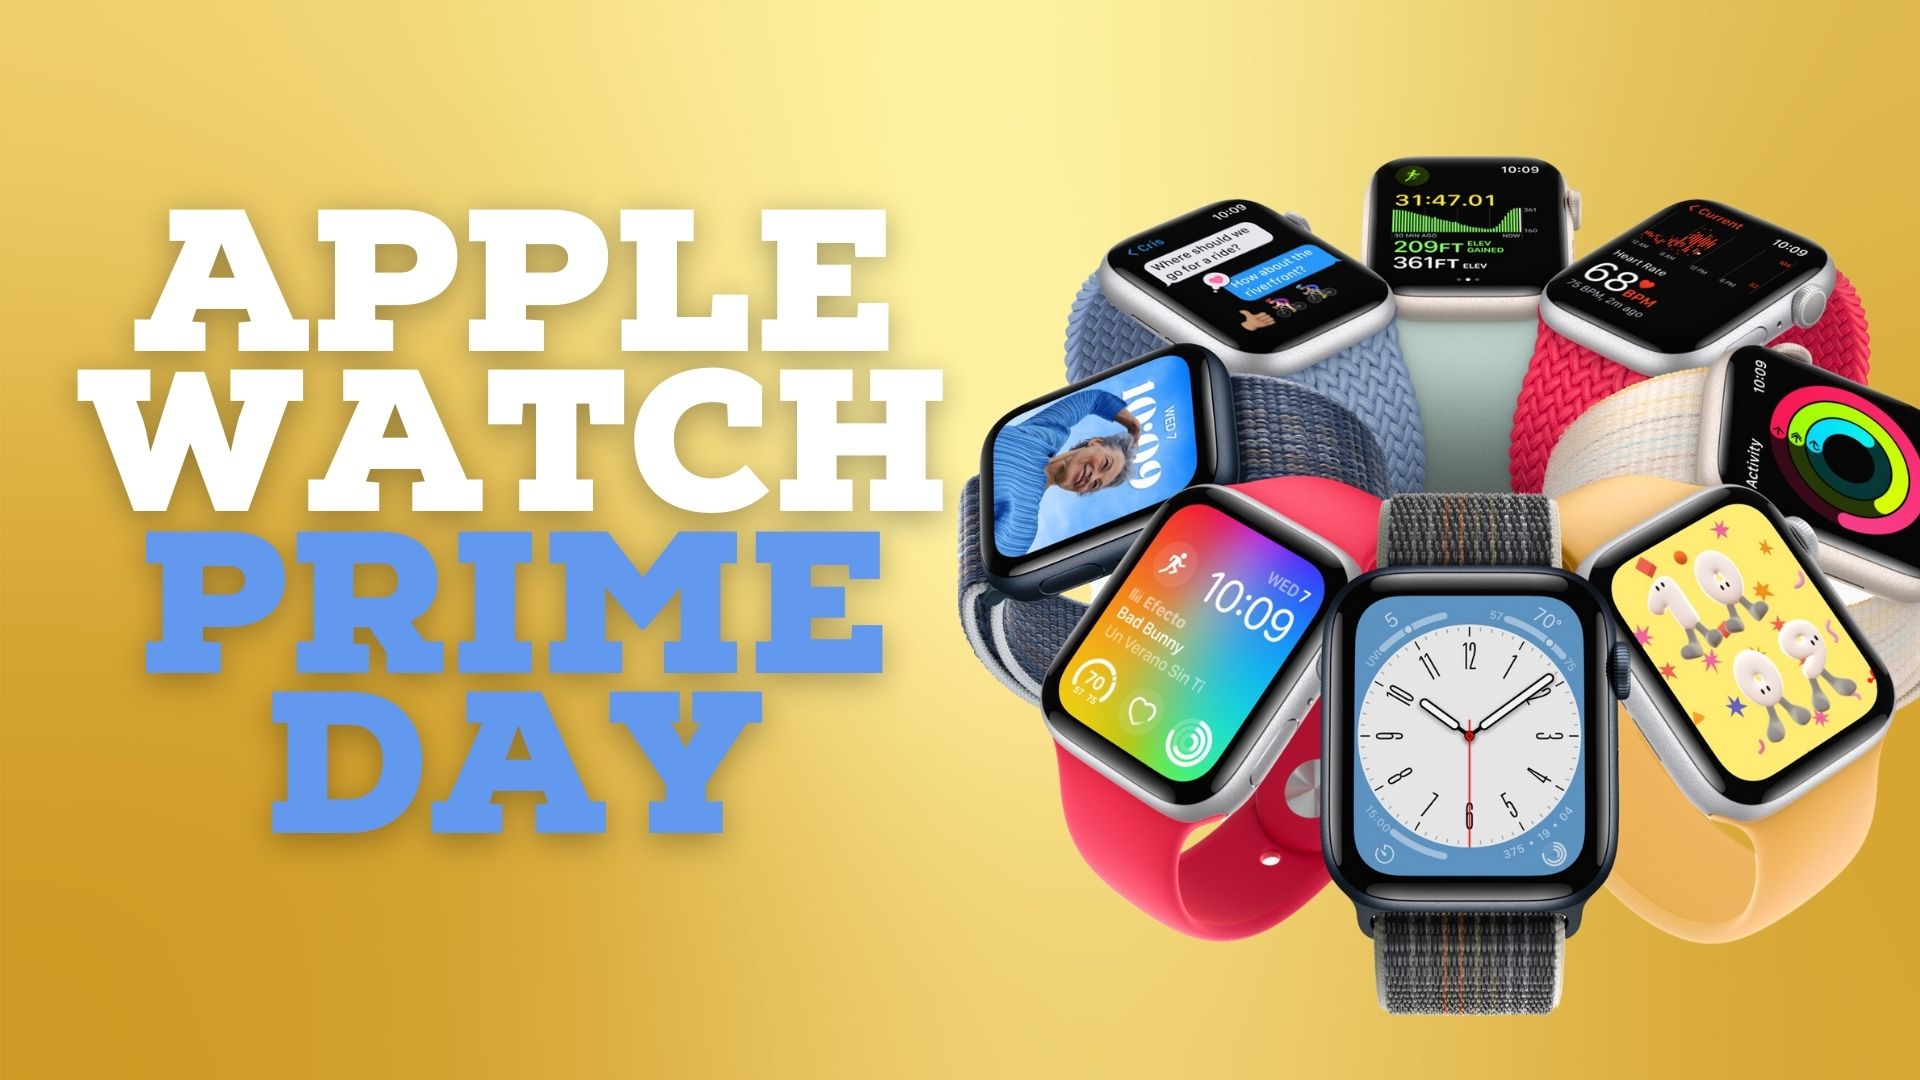 You can still get an epic Apple Watch deal after Prime Day iMore